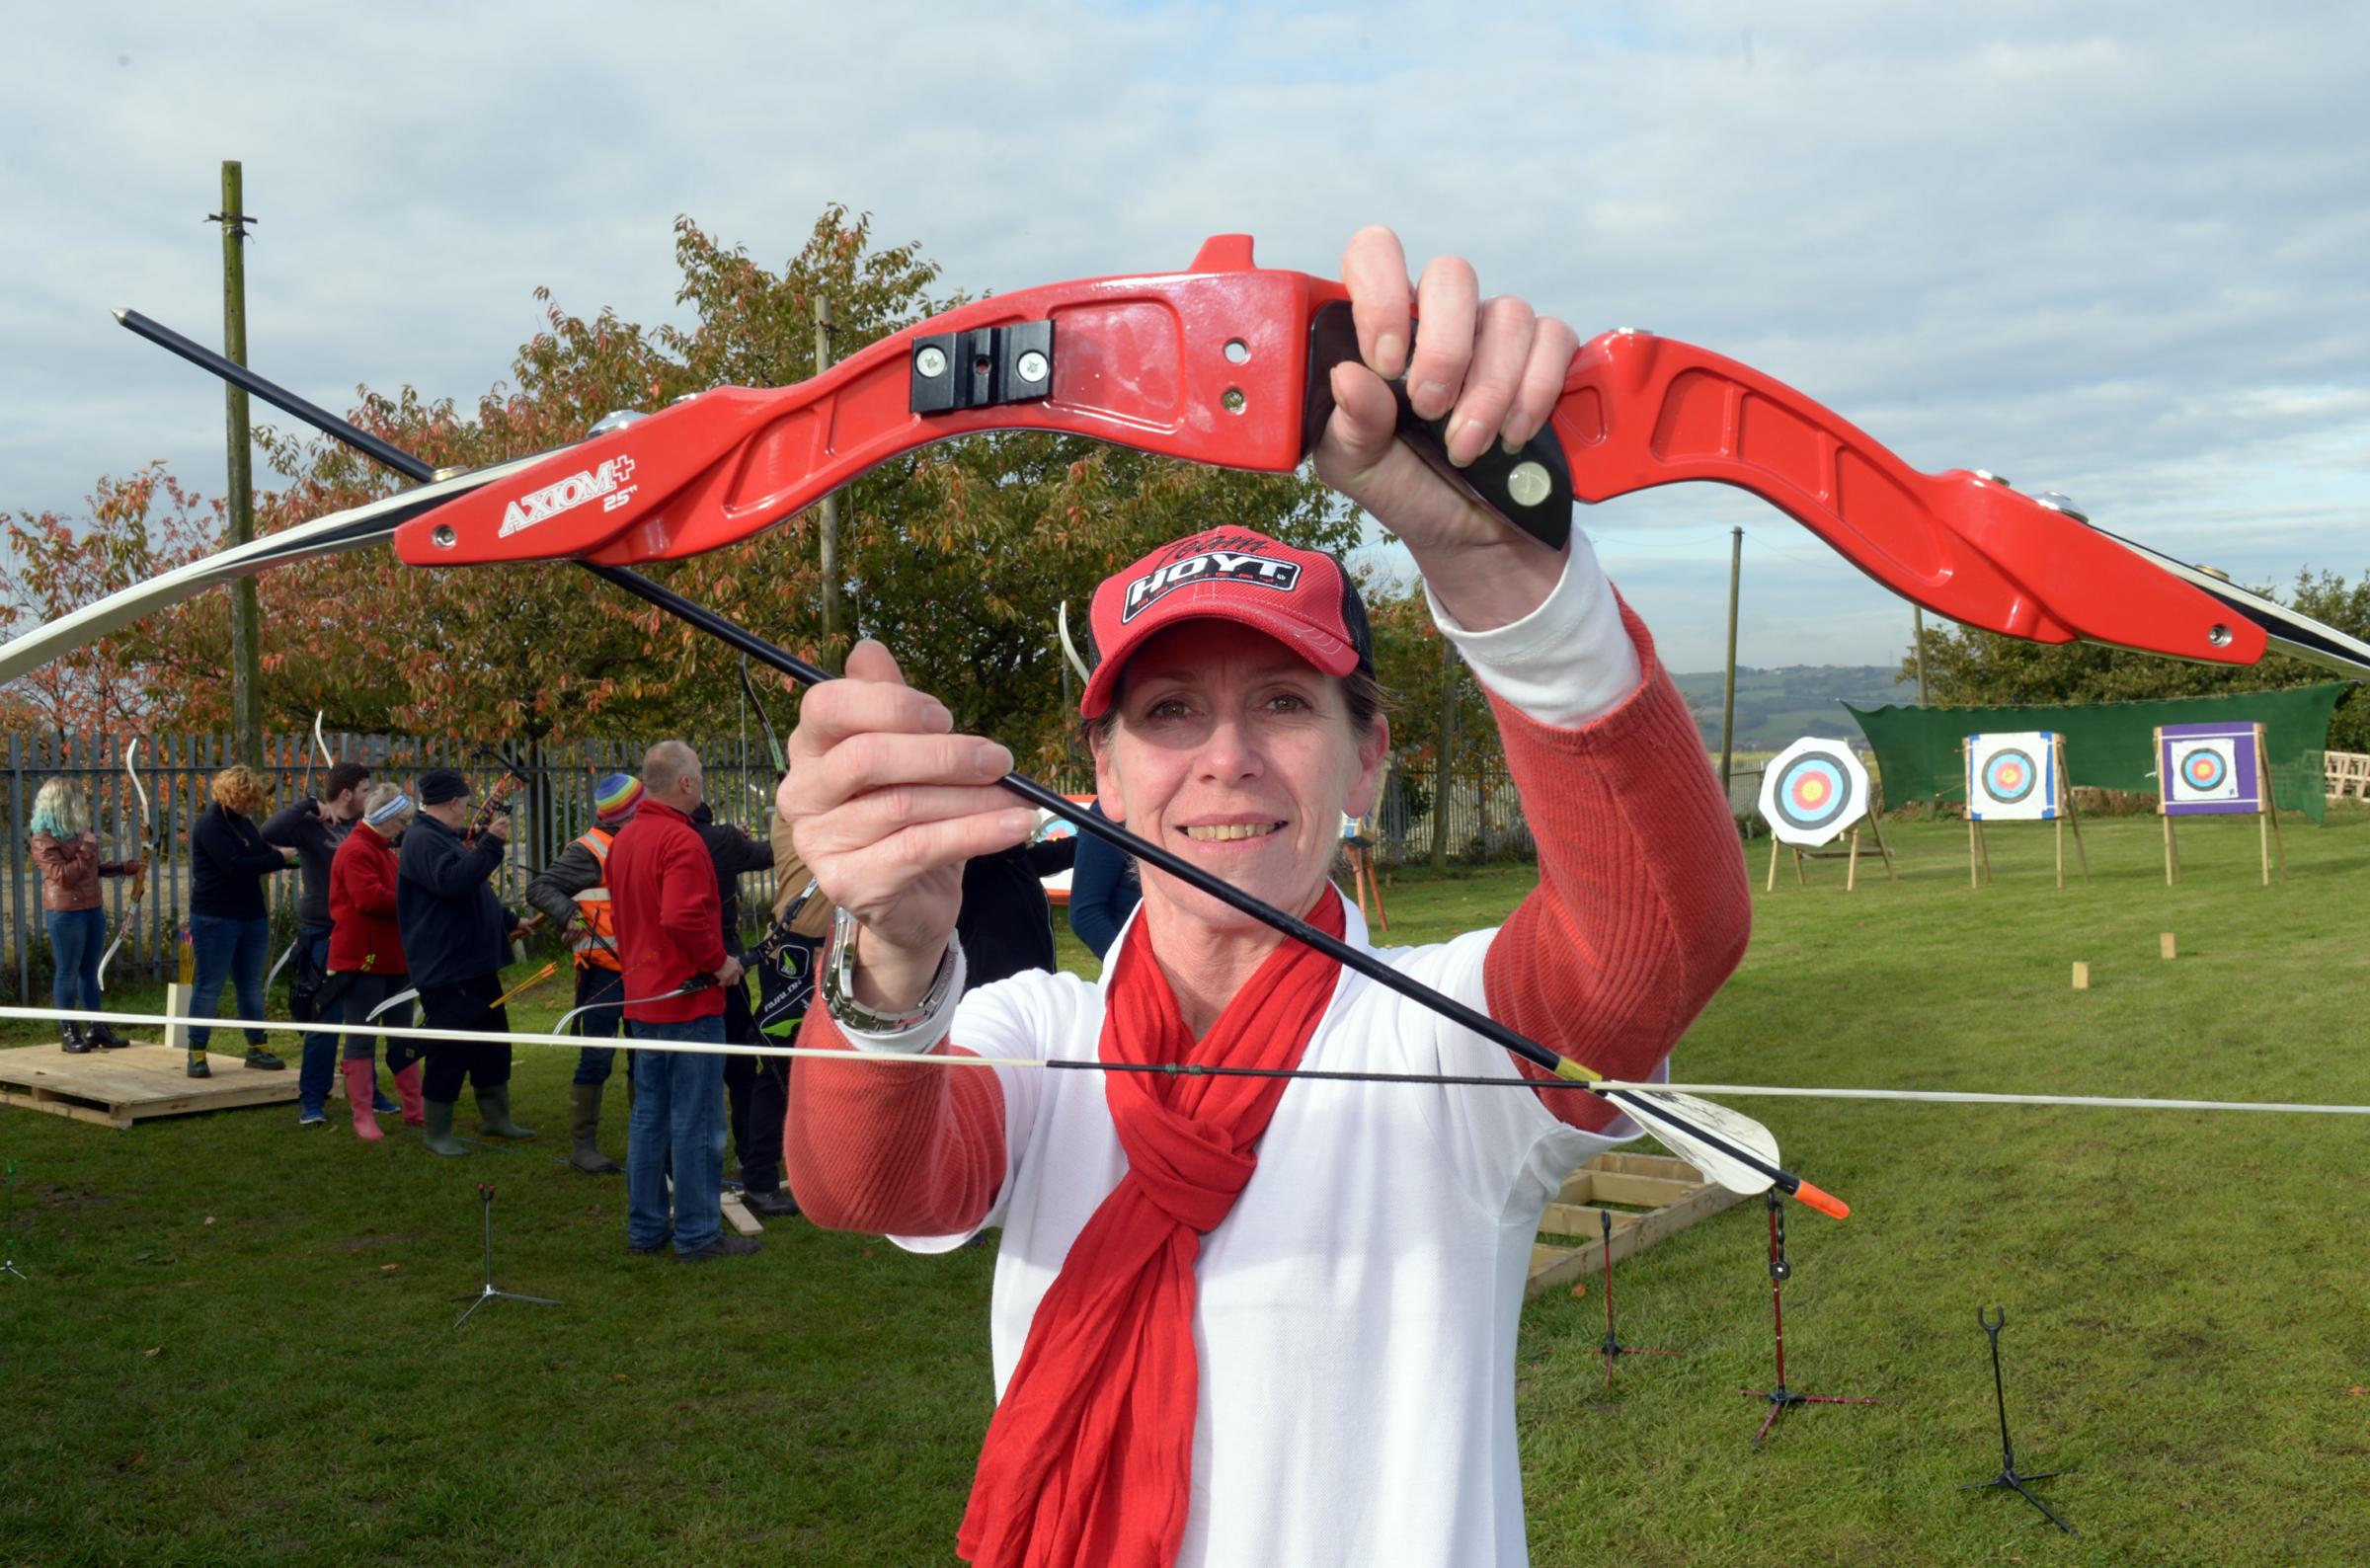 Darwen archery club aiming to push youngsters to ‘superstar’ levels